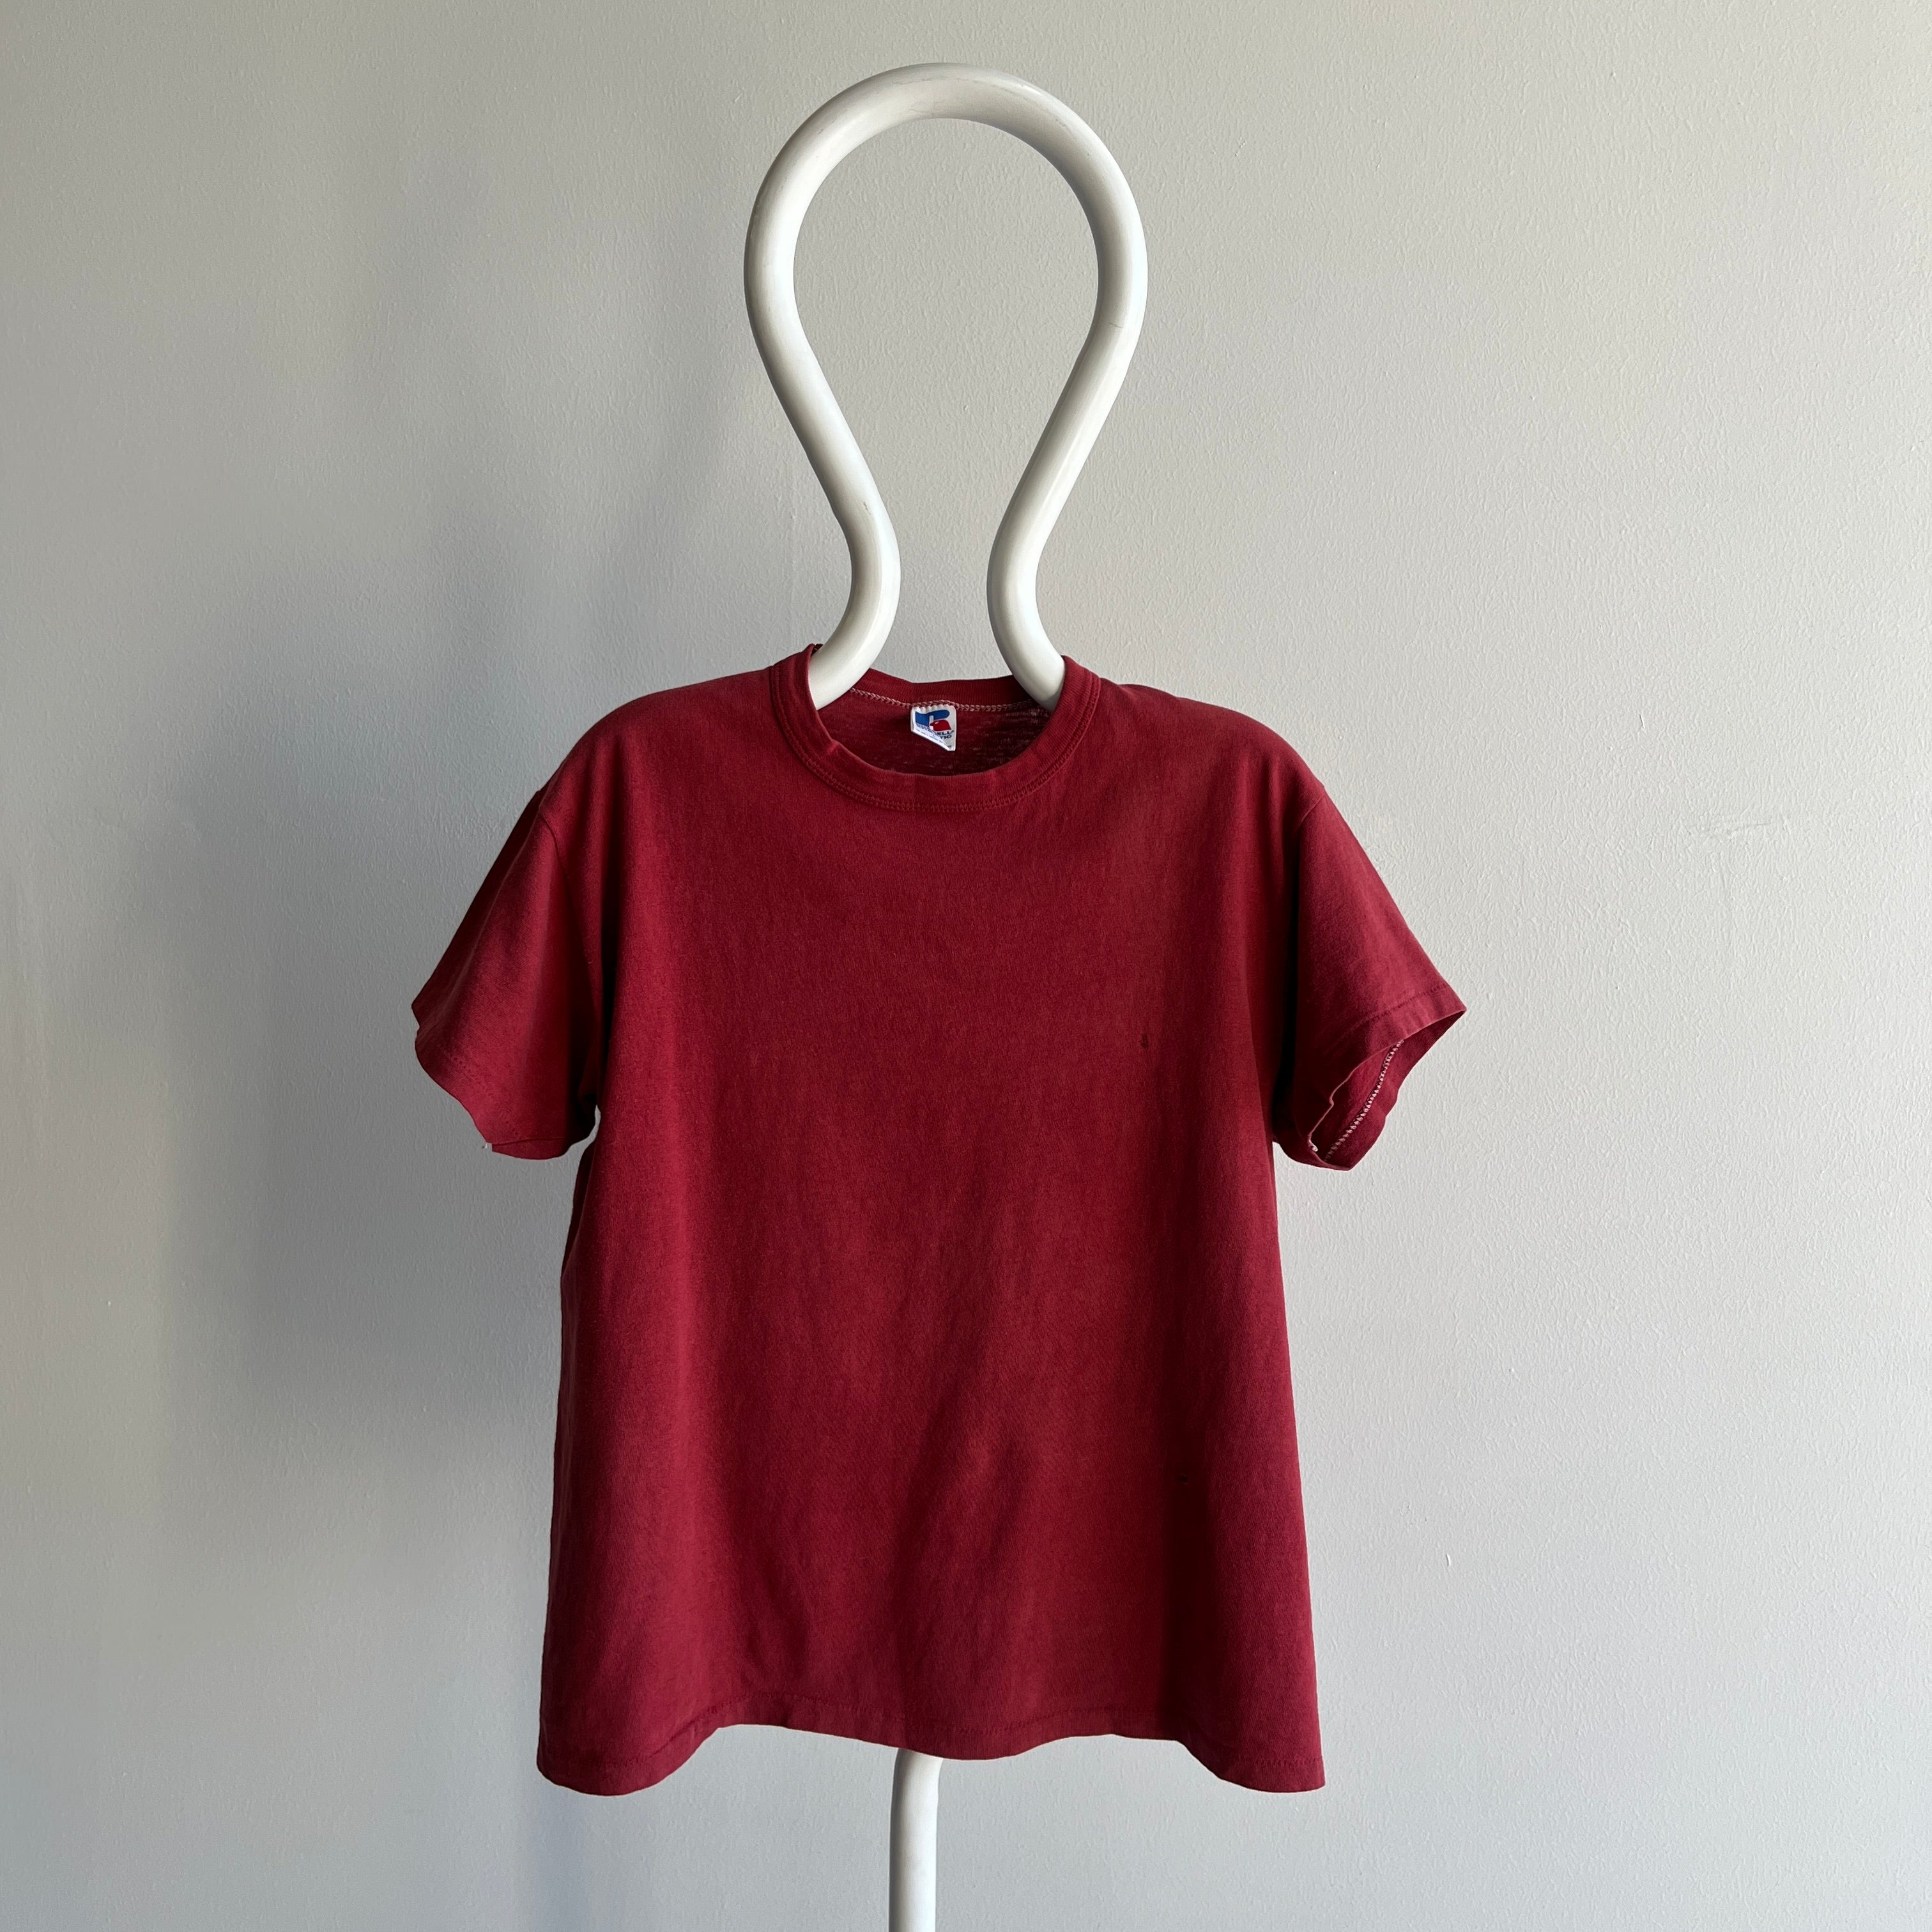 1980s Faded Cotton Rolled Neck Russell Brick Colored T-Shirt